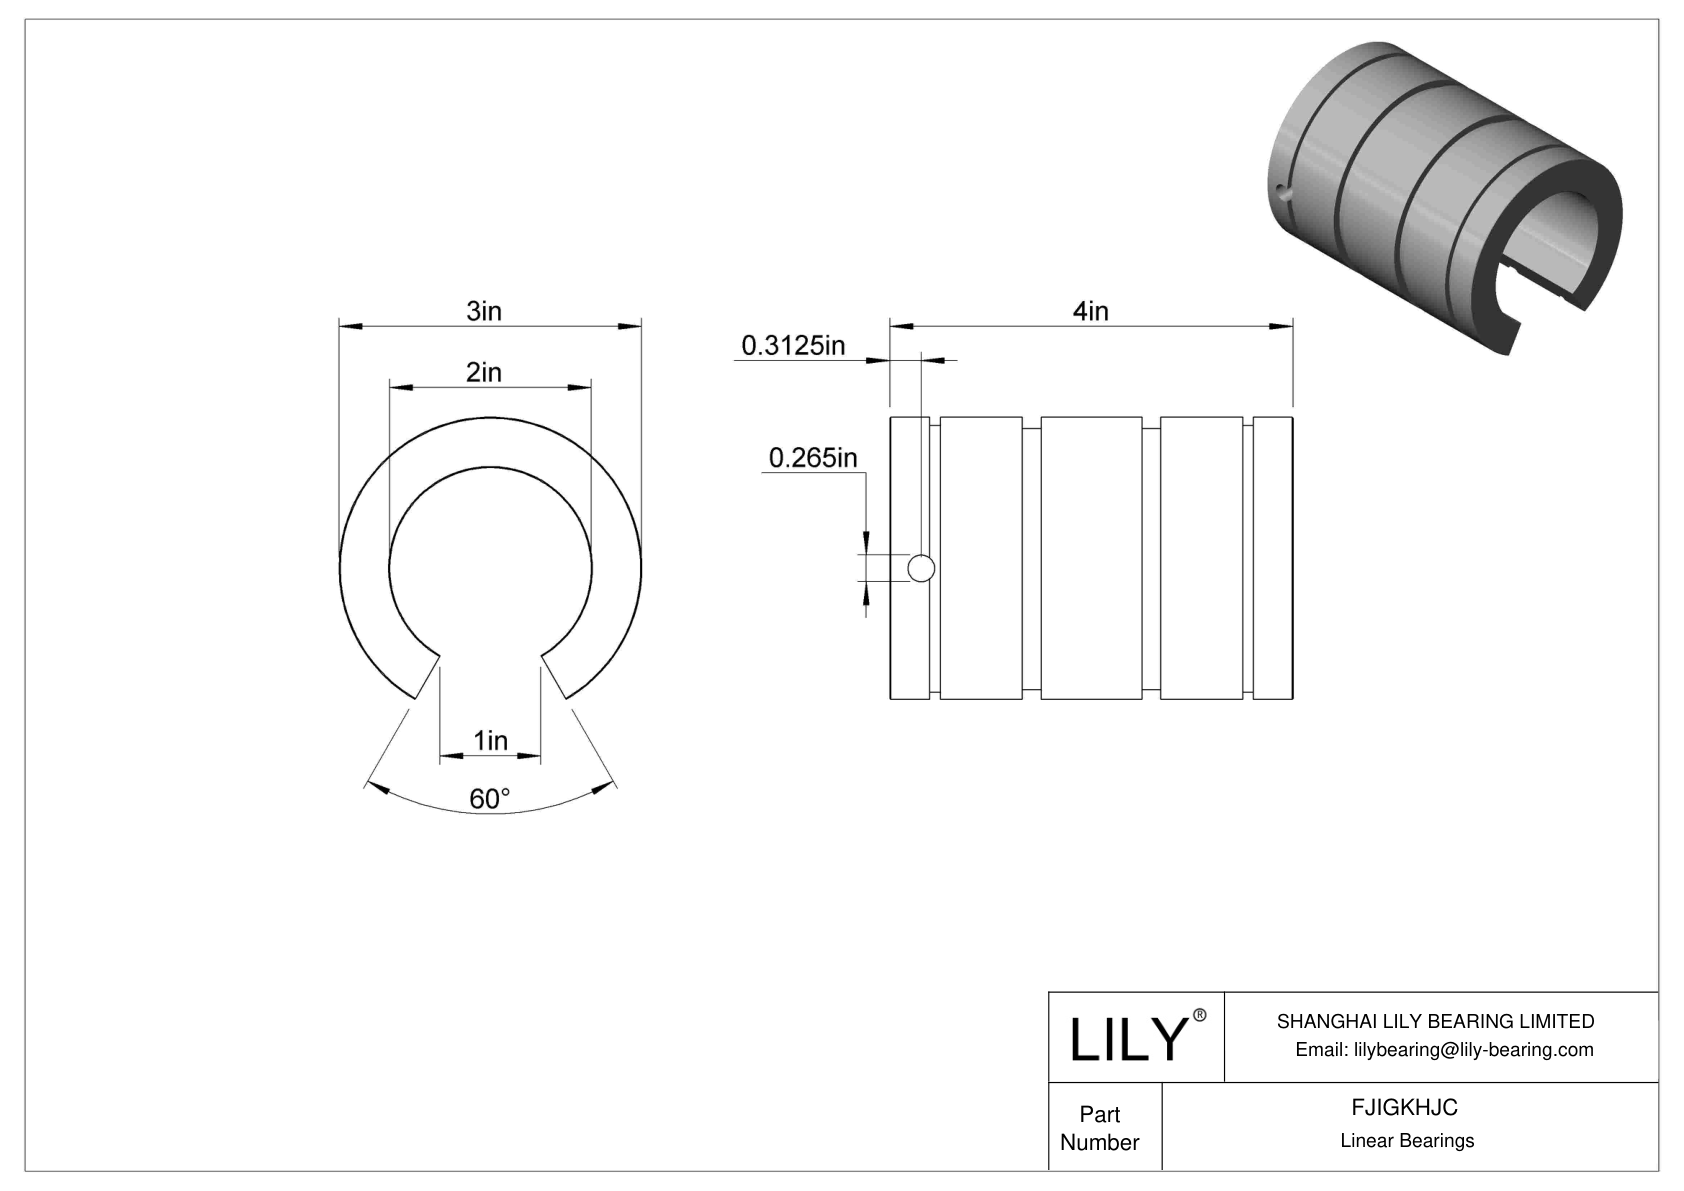 FJIGKHJC Common Linear Sleeve Bearings for Support Rail Shafts cad drawing